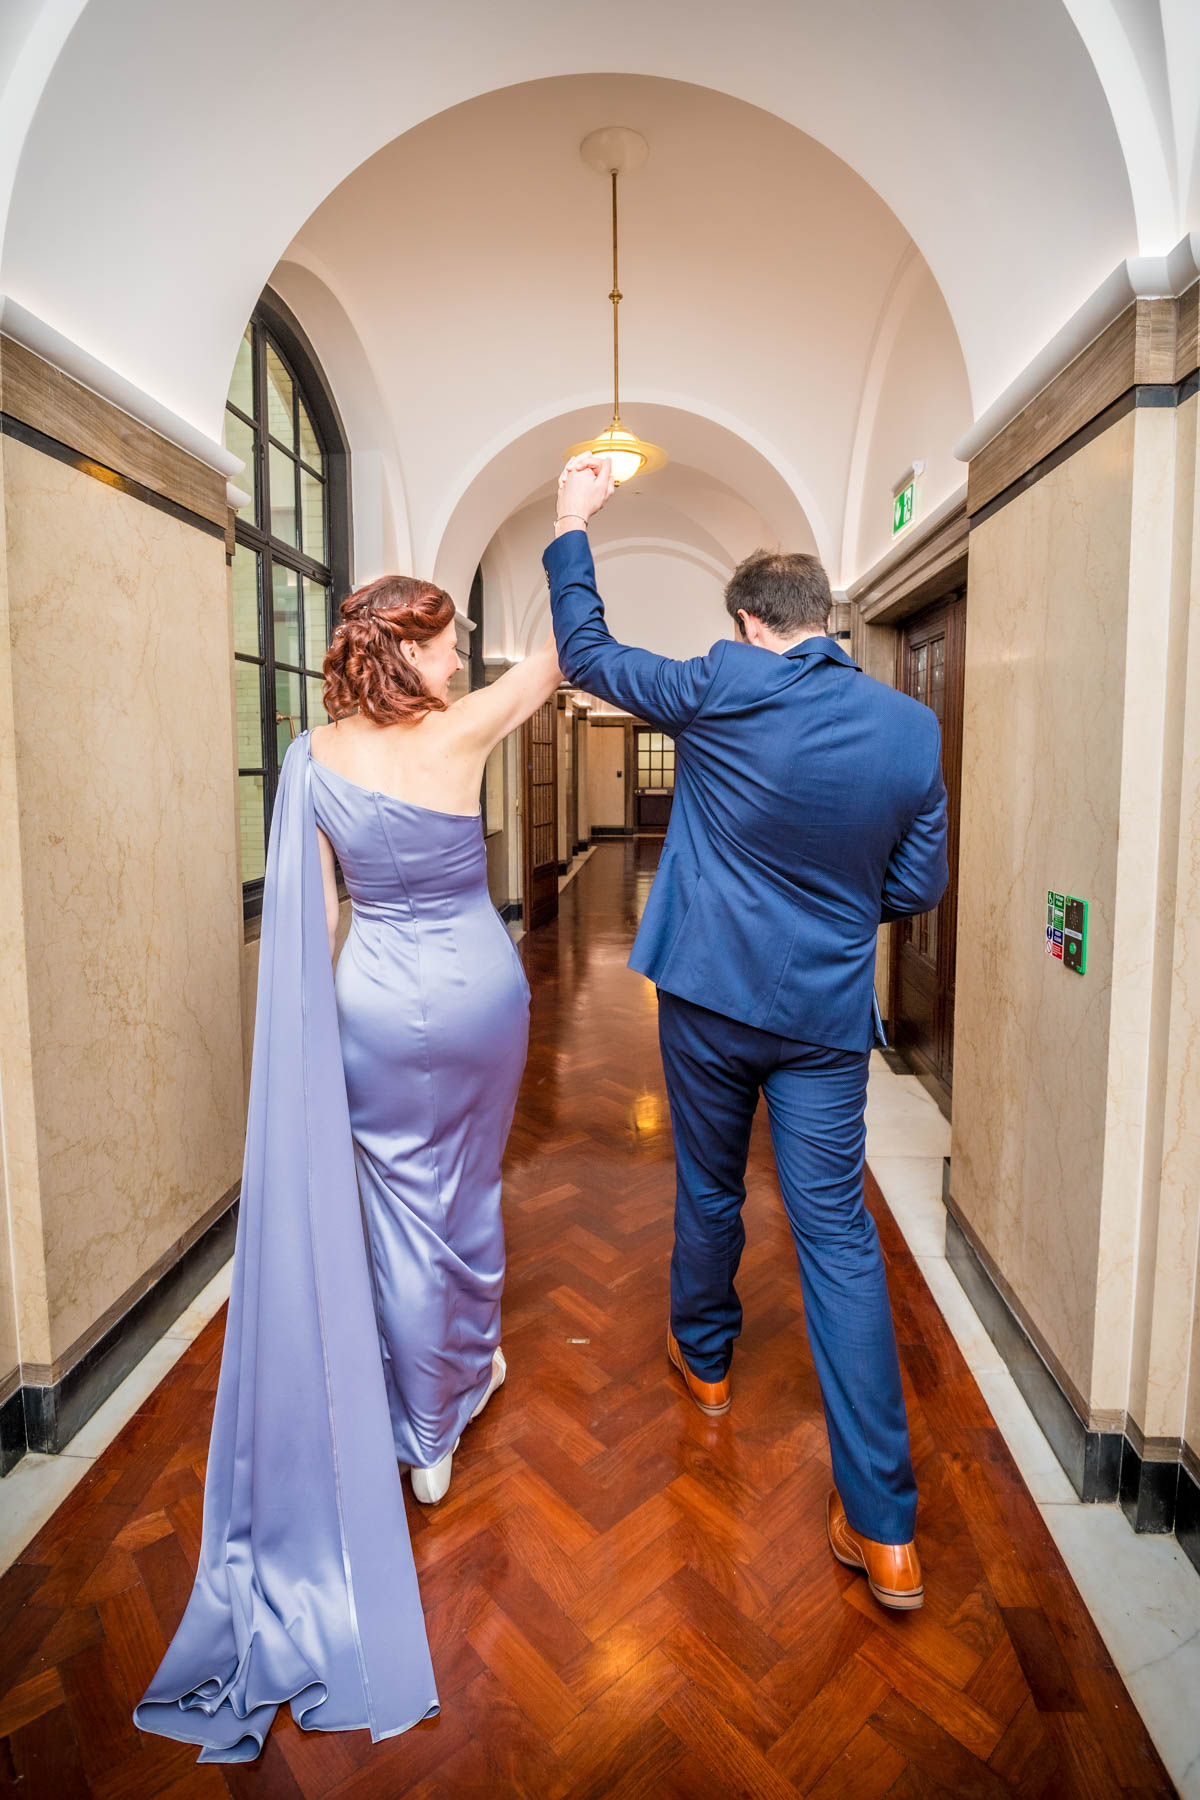 Newlyweds walking away from camera and pumping arms in the air after their wedding ceremony